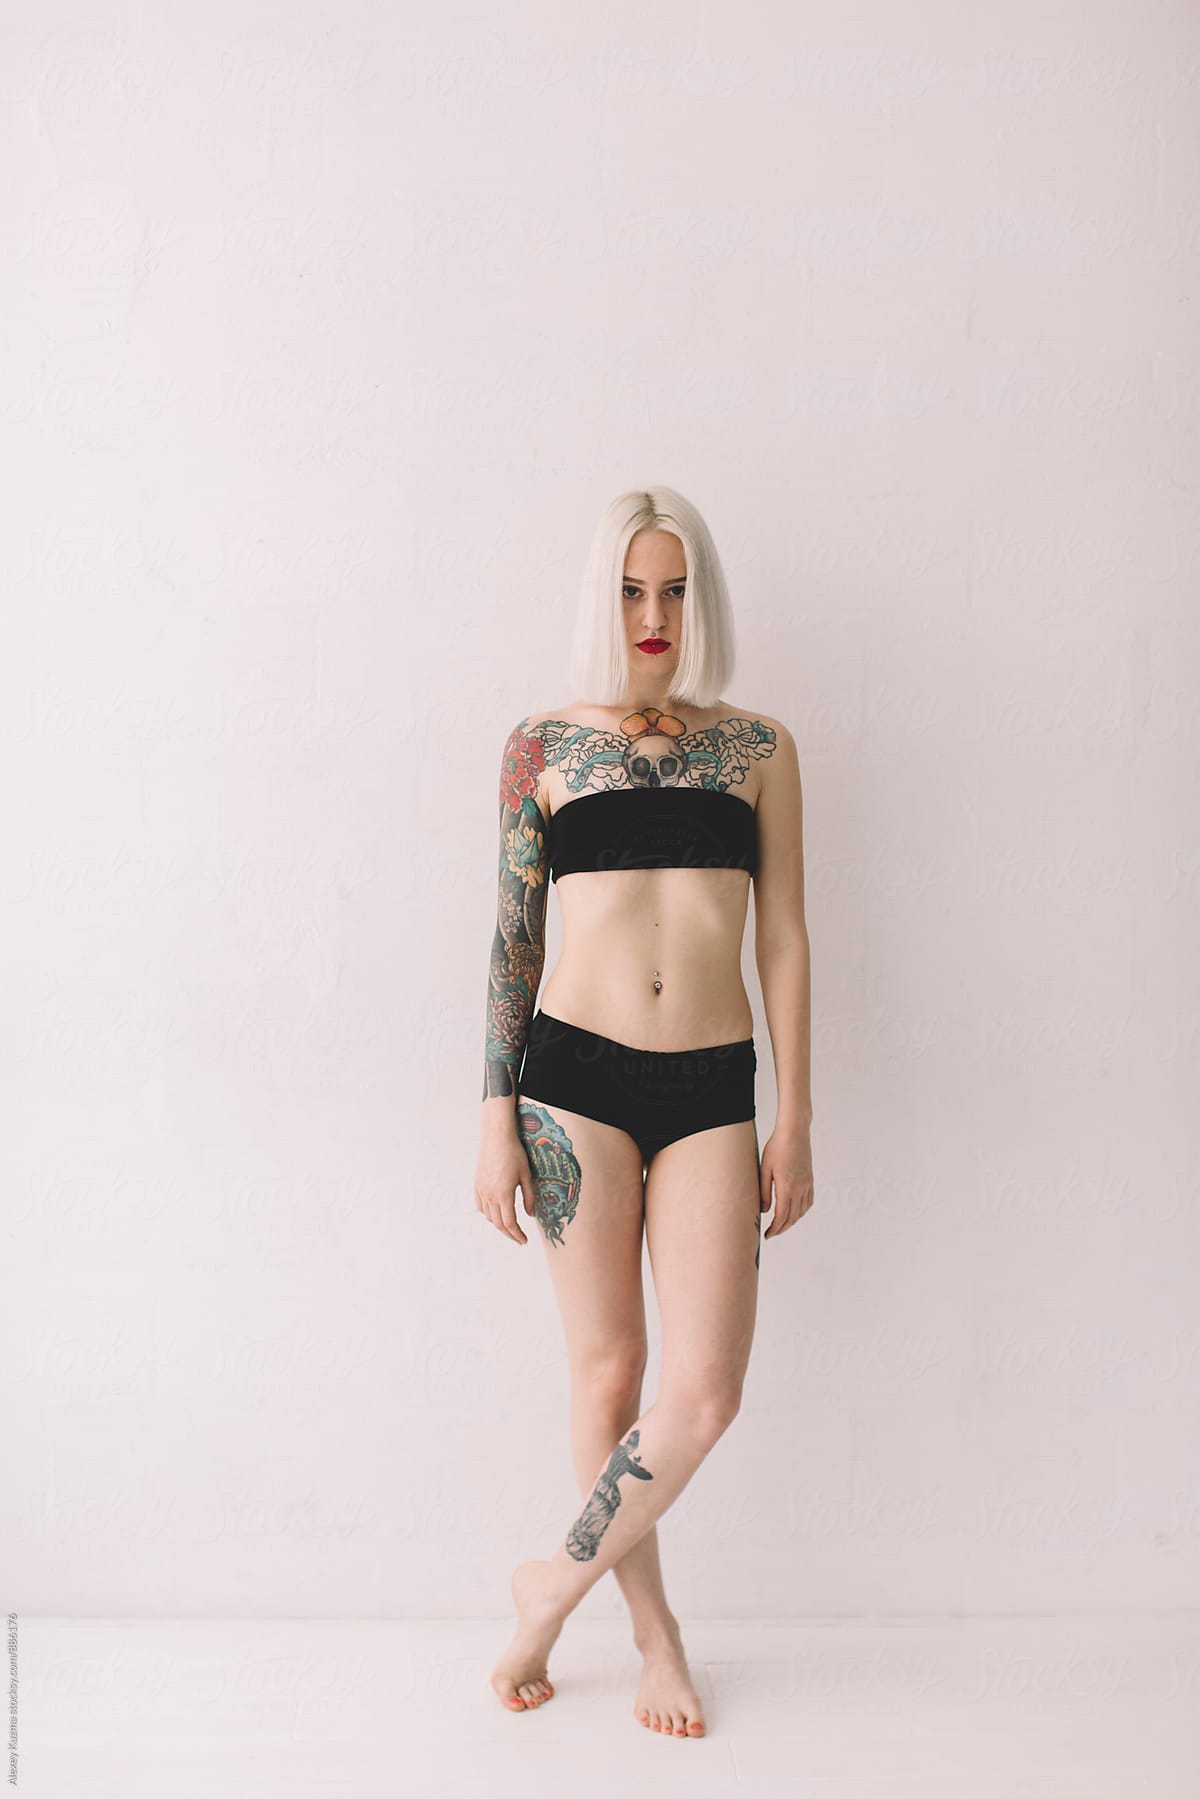 blond woman with tattoos on the white background